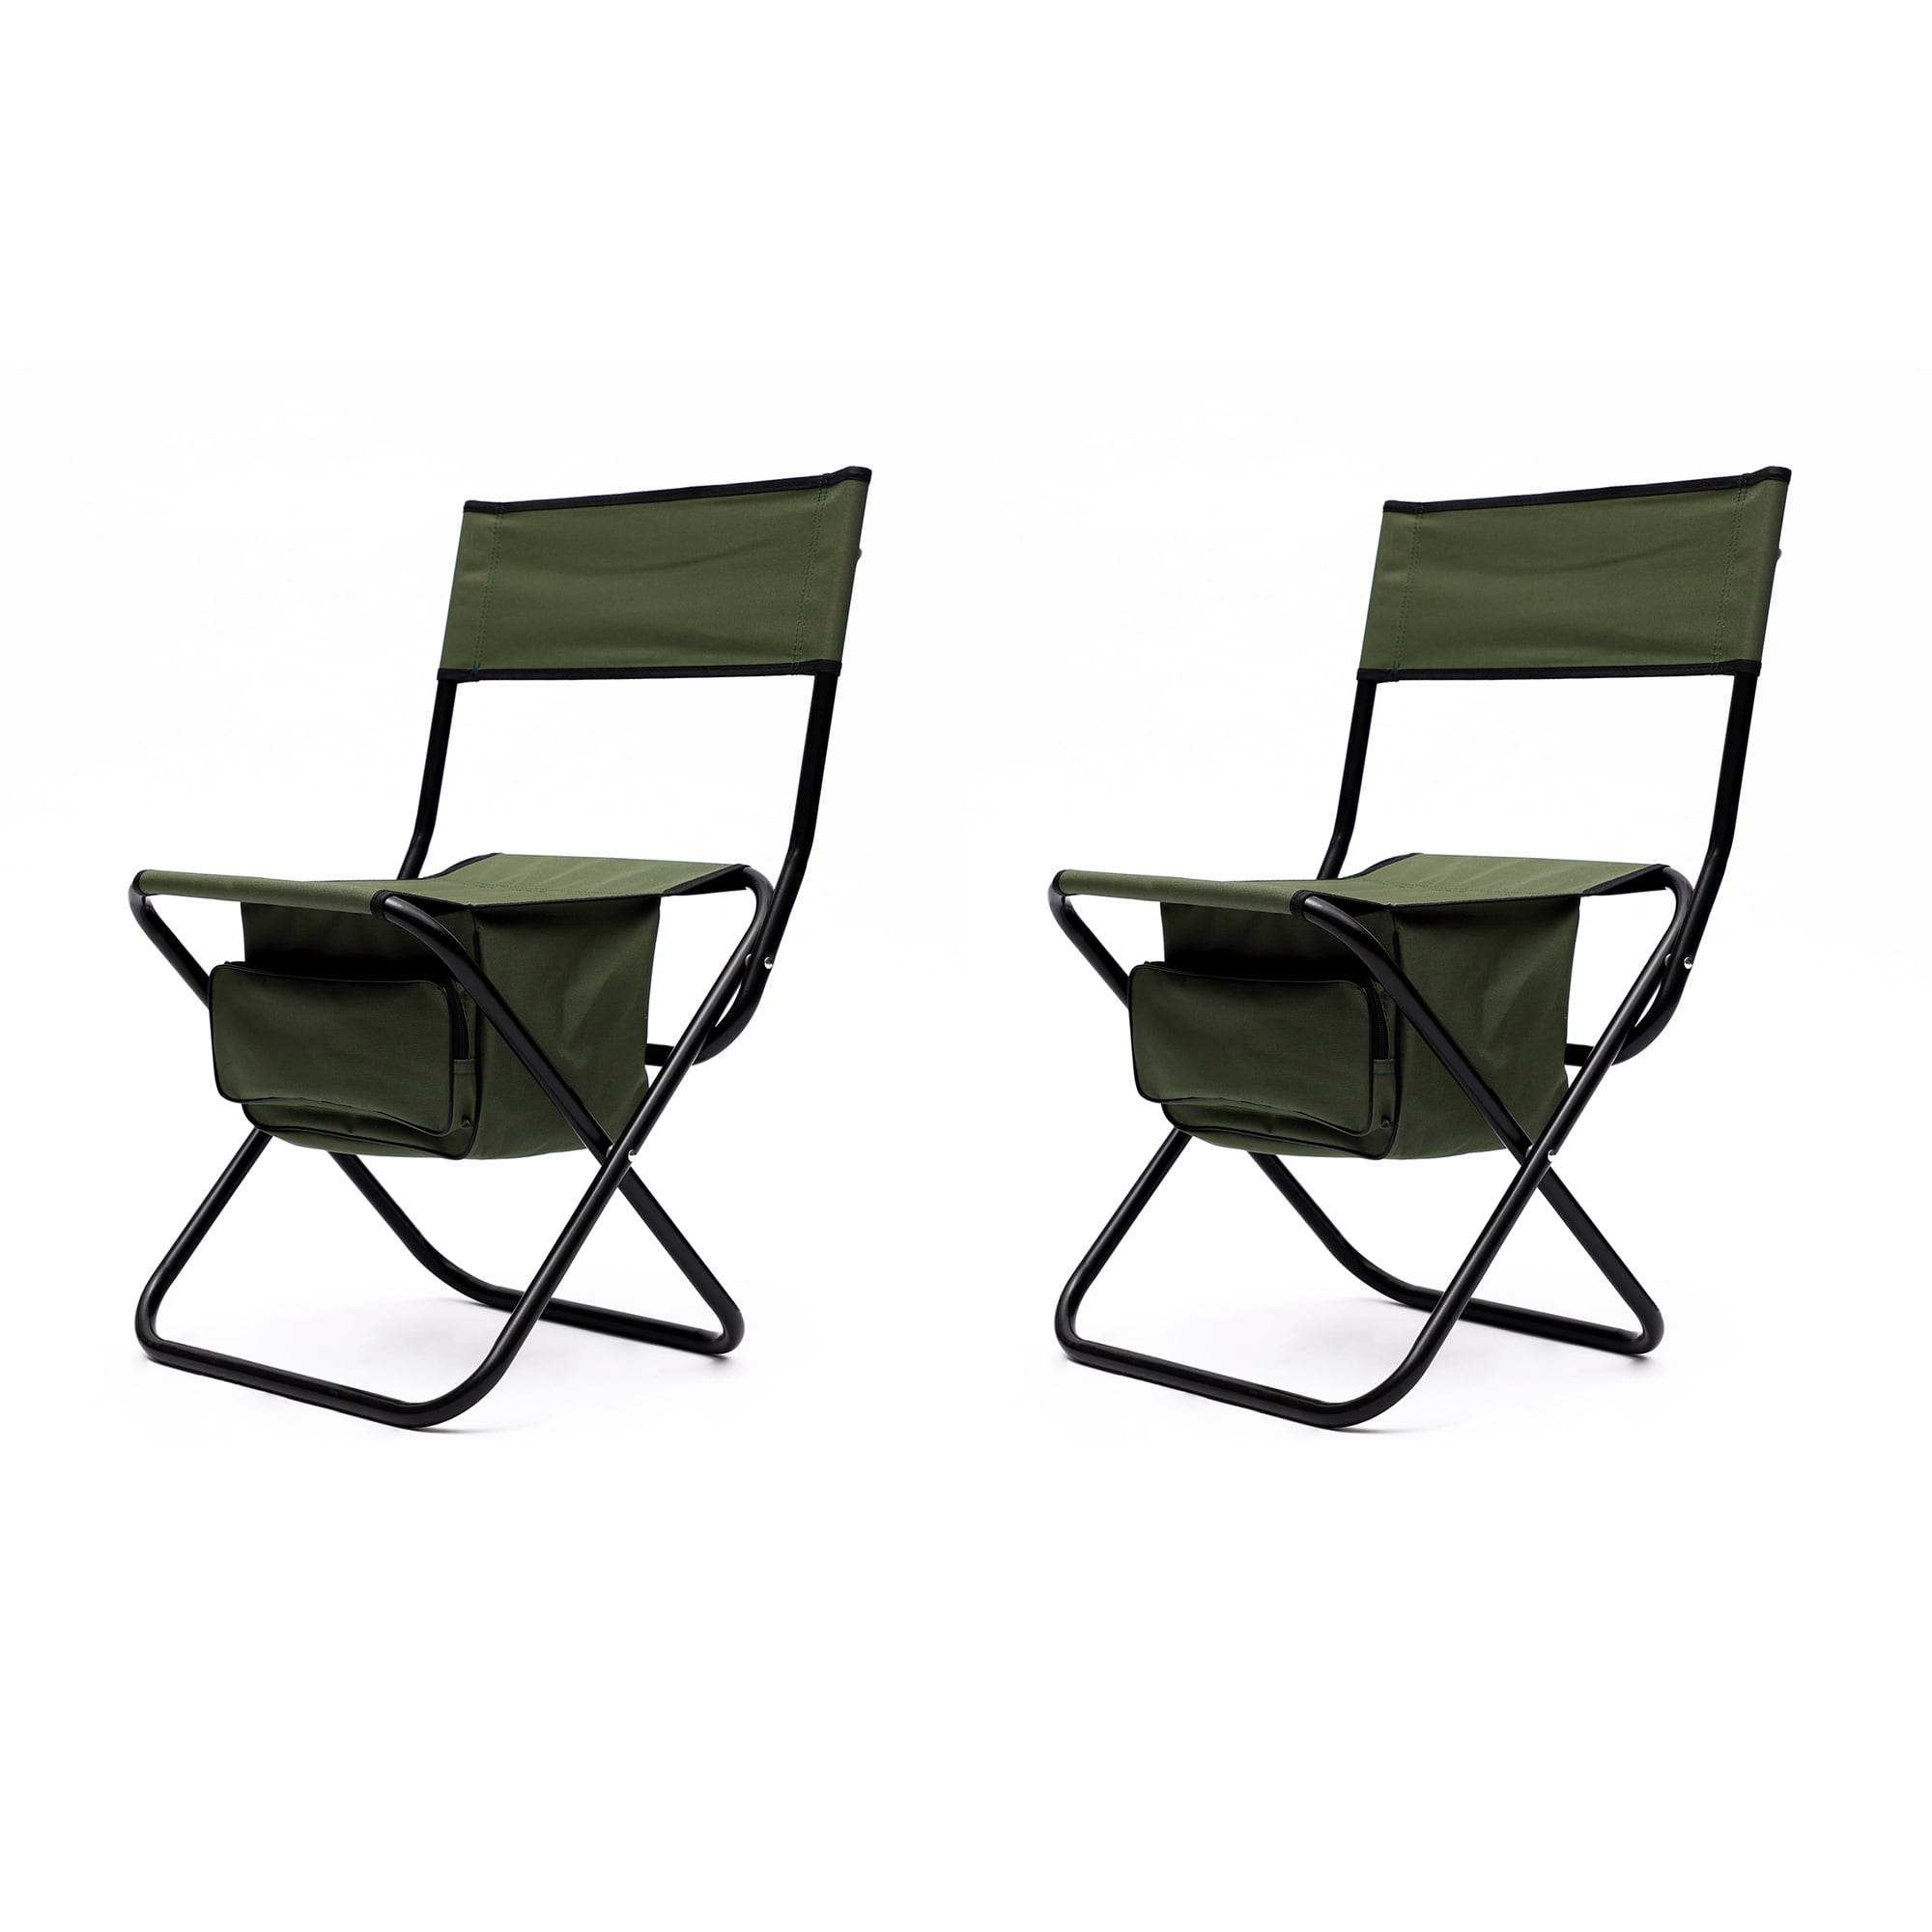 2-Piece Folding Outdoor Chair with Storage Bag, Portable Chair for Indoor,  Outdoor Compact Lightweight Camping Chair, Picnics and Fishing Chair